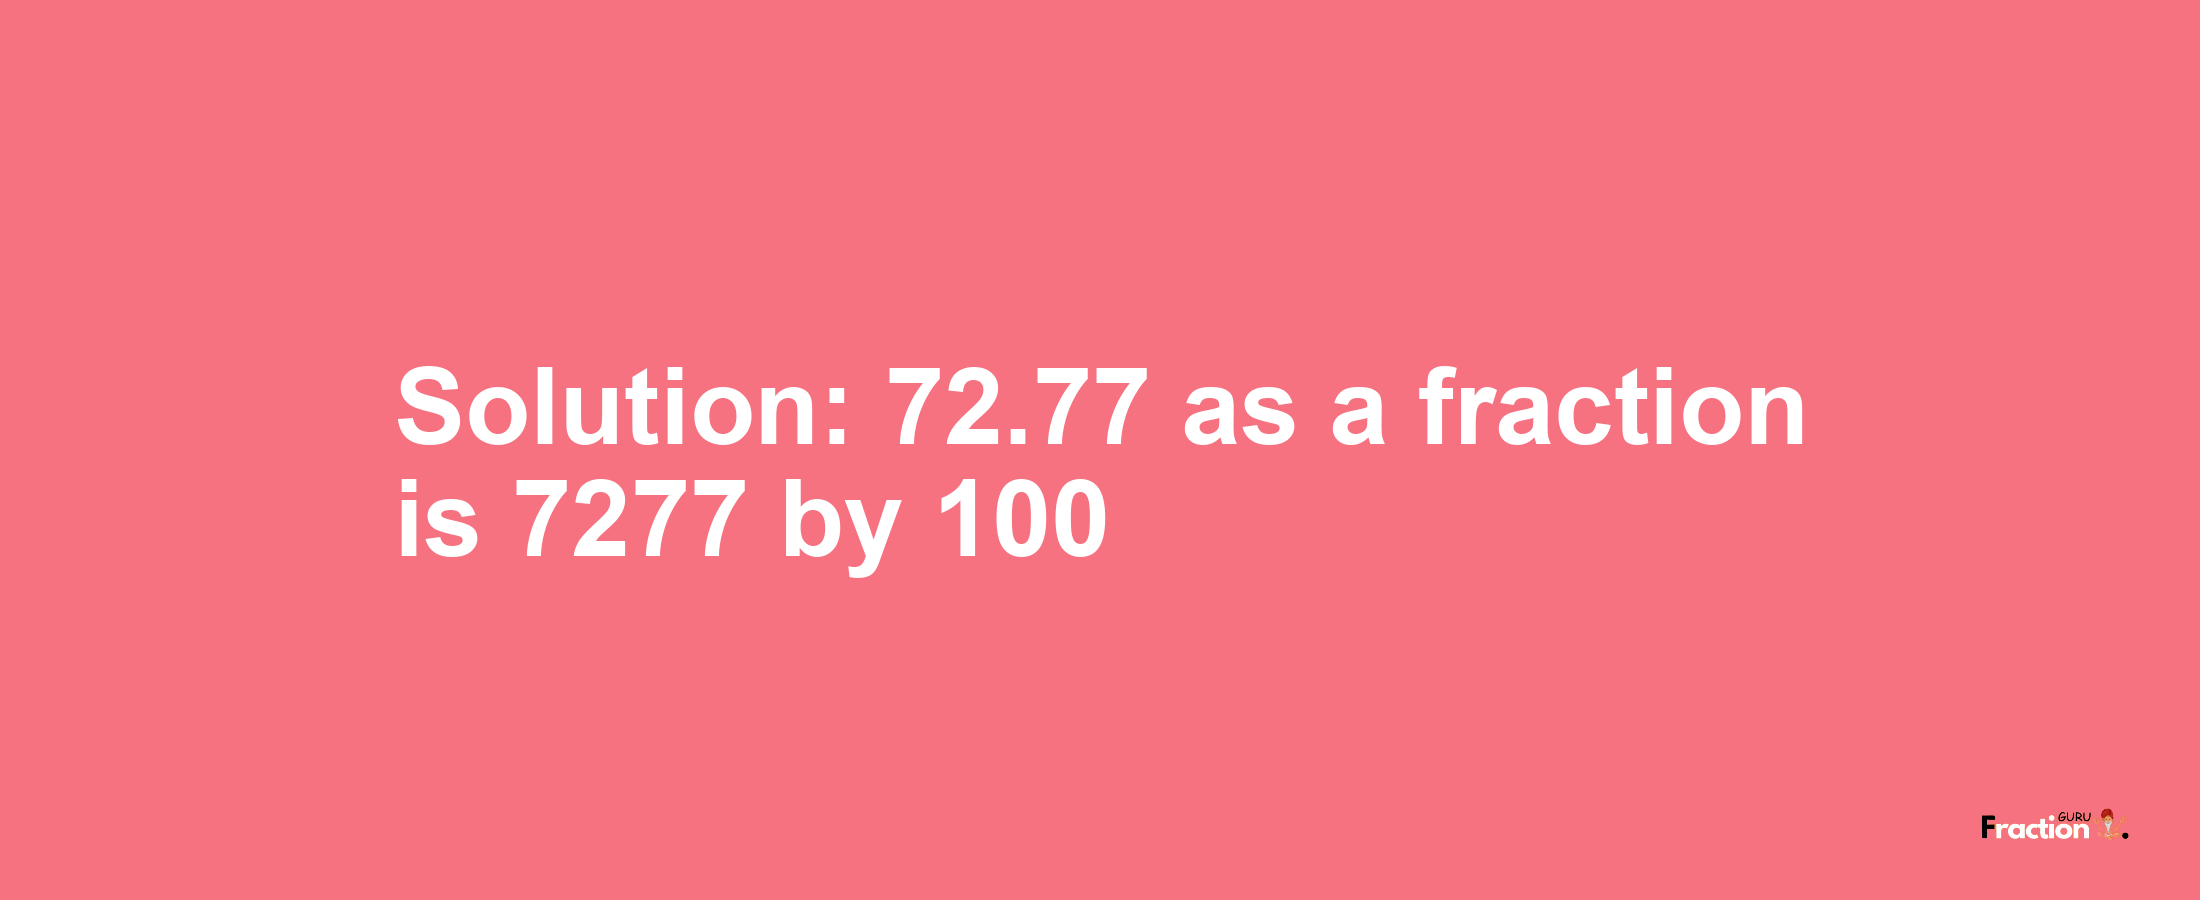 Solution:72.77 as a fraction is 7277/100